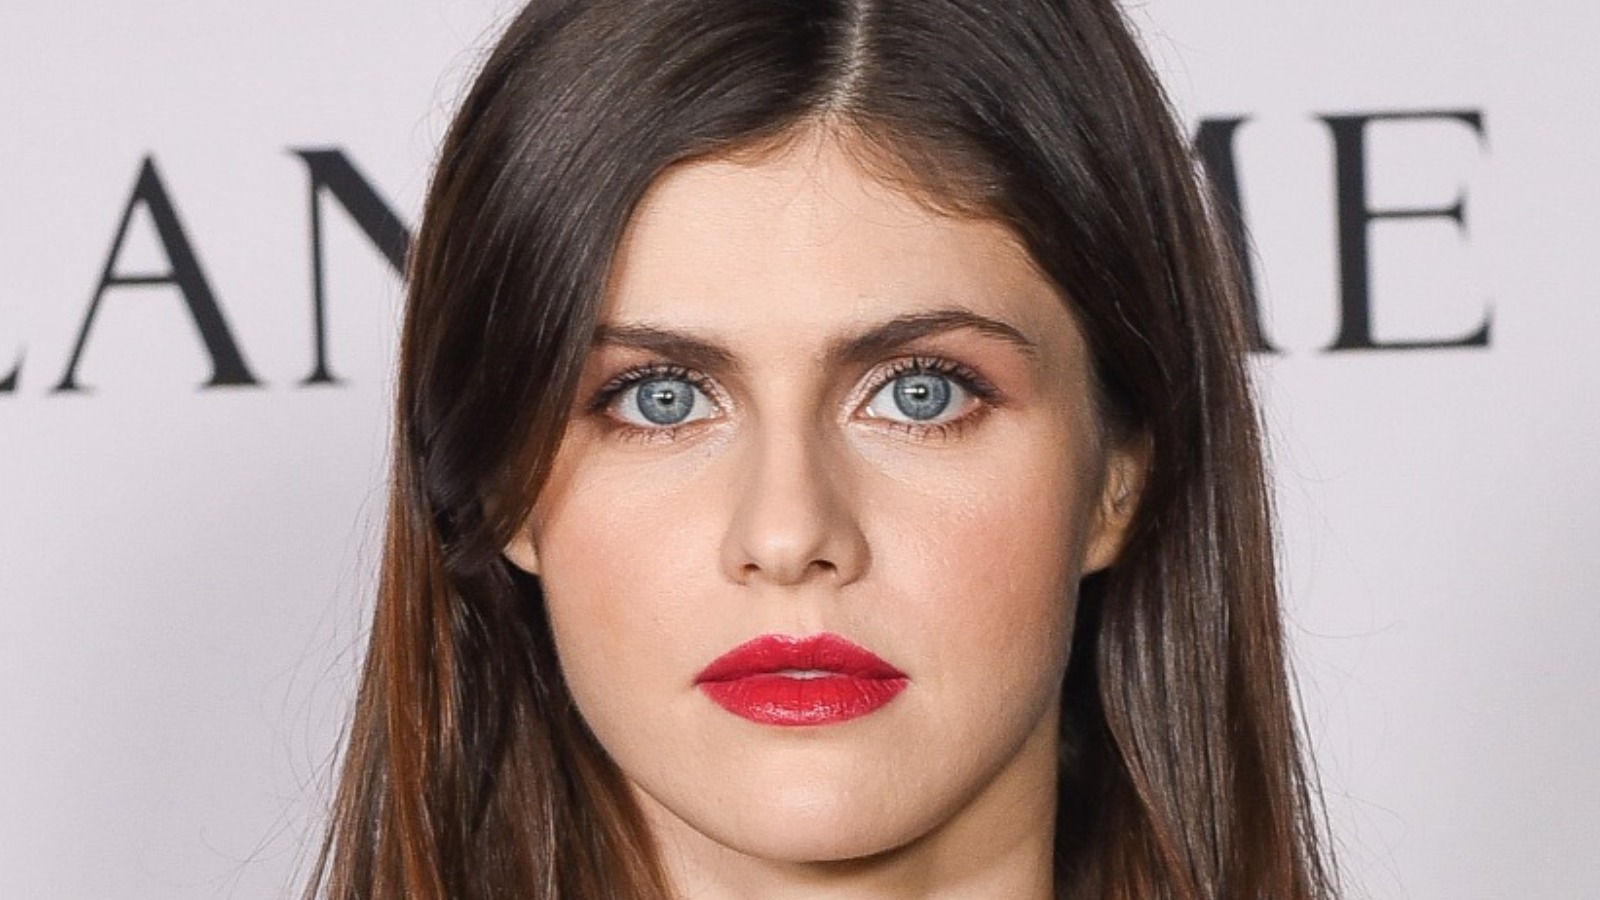 Mayfair Witches Cycle: Alexandra Daddario starring in the TV series as Rowan